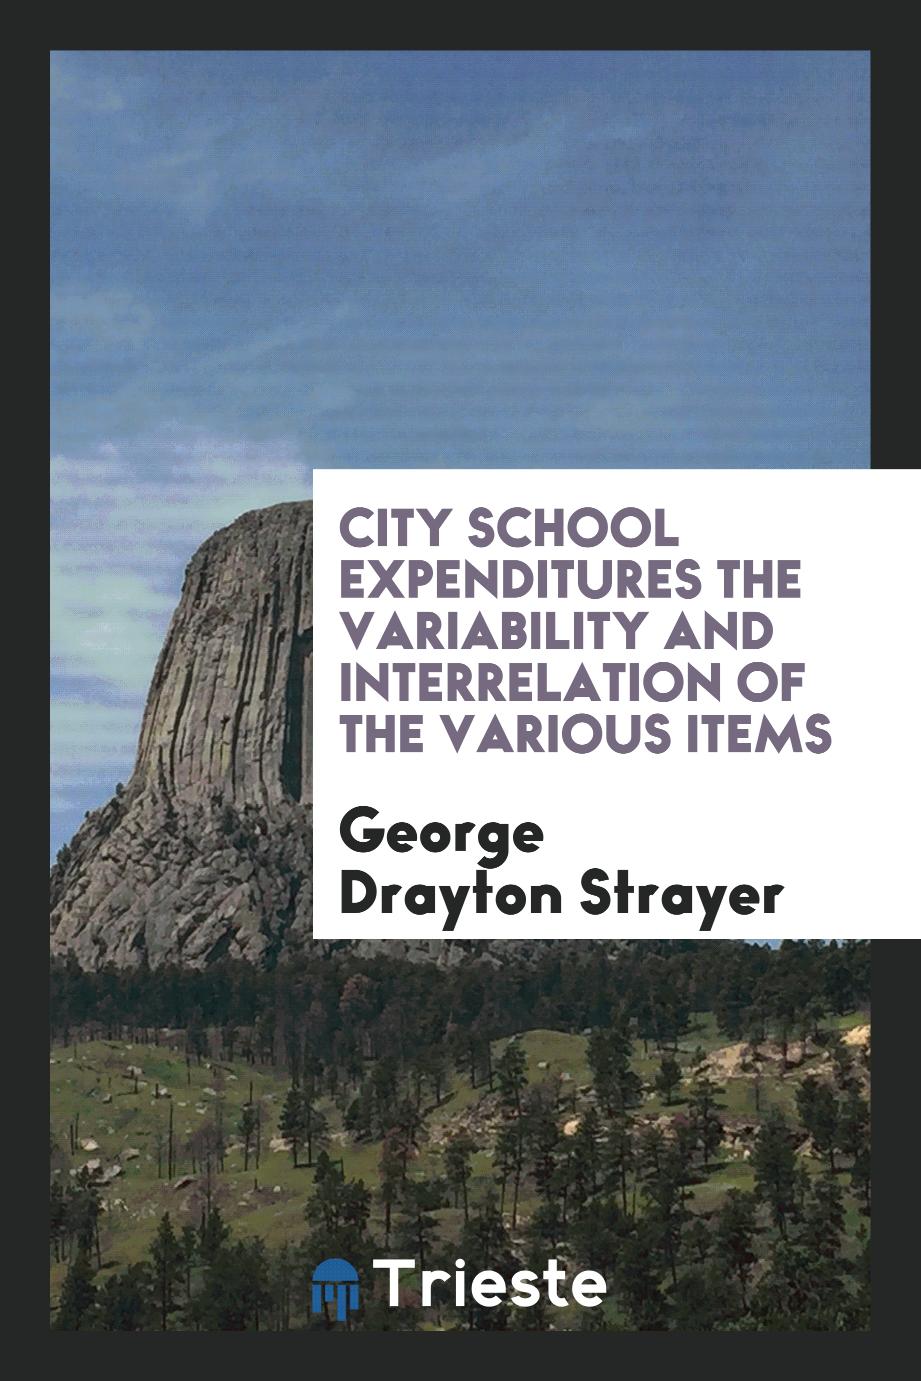 City School Expenditures the Variability and Interrelation of the Various Items